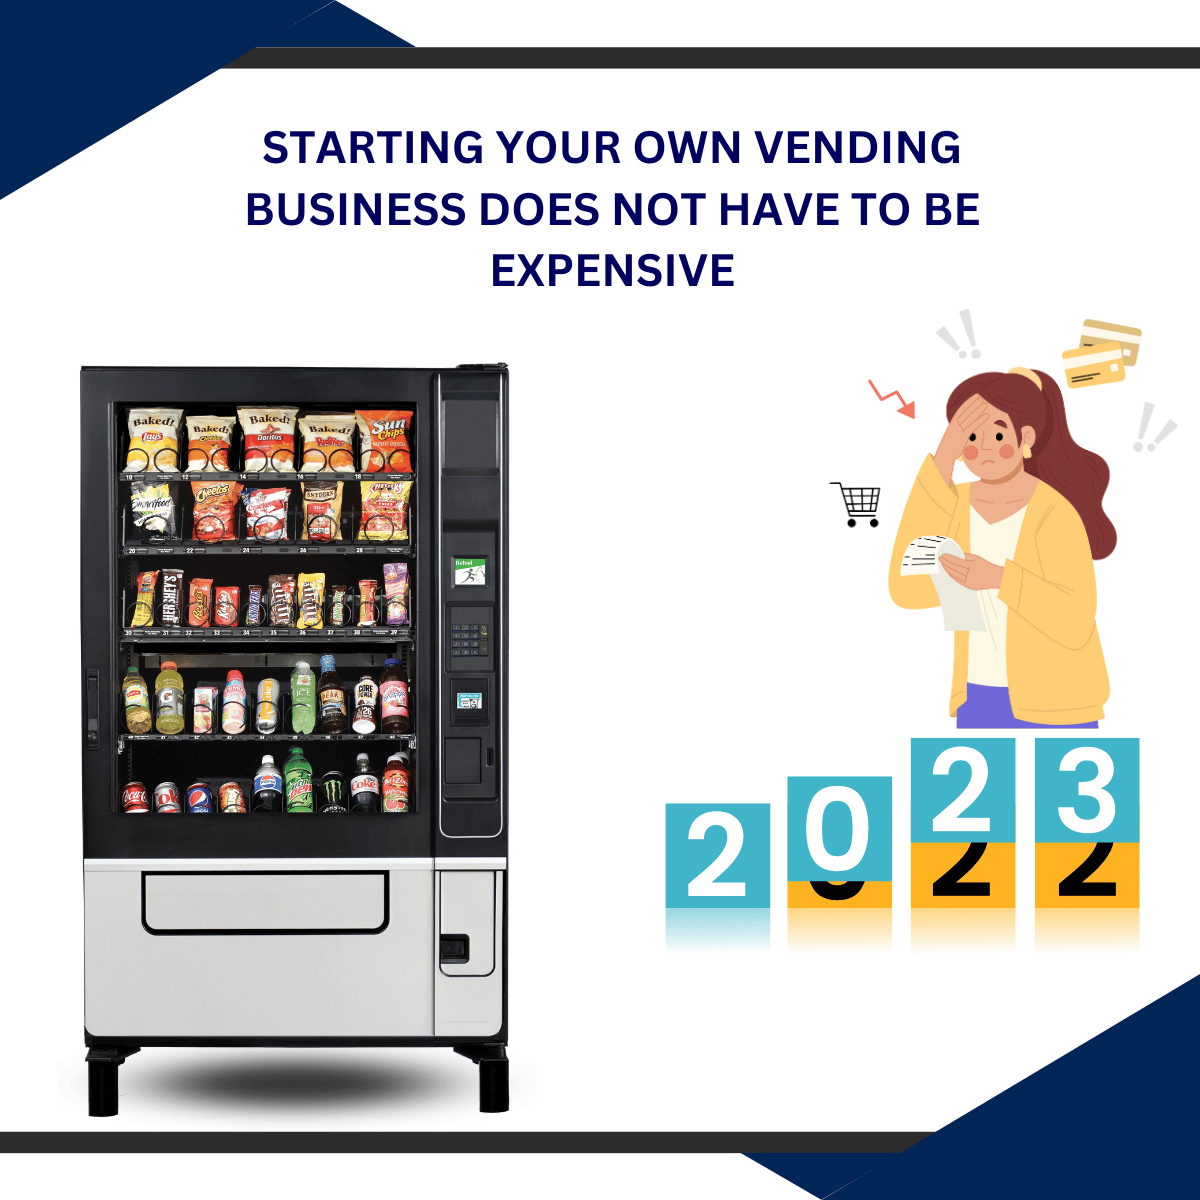 STARTING YOUR OWN VENDING BUSINESS DOES NOT HAVE TO BE EXPENSIVE